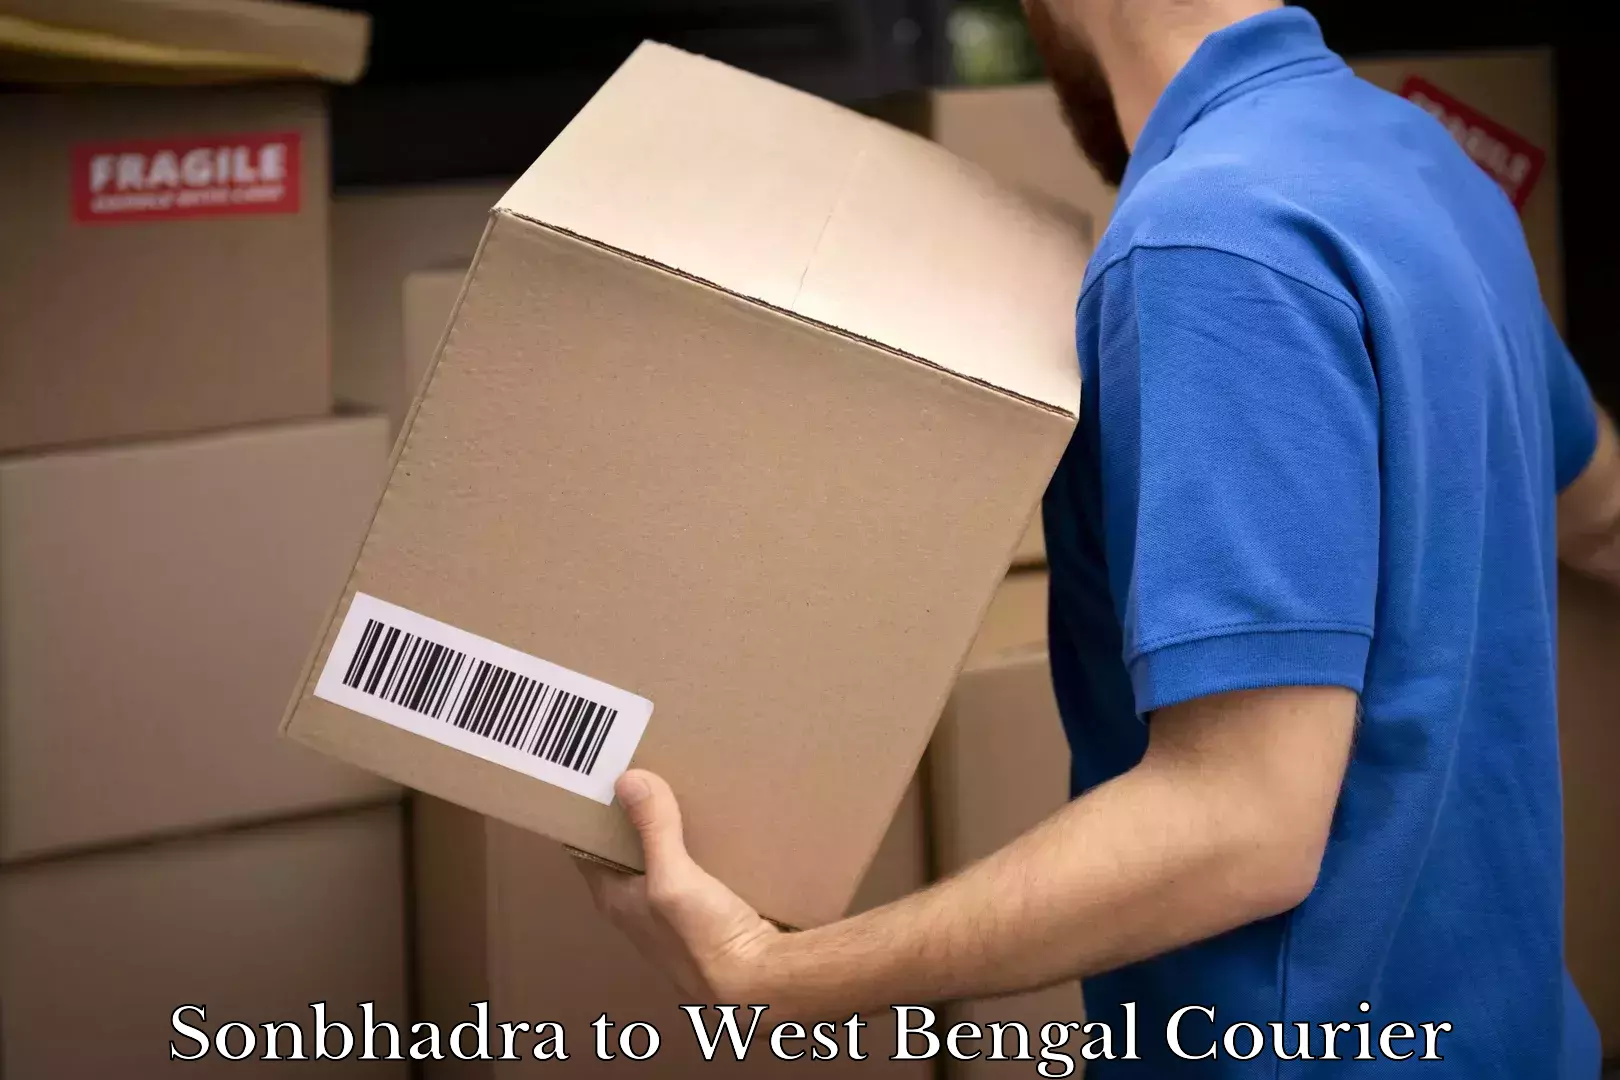 Global courier networks Sonbhadra to West Bengal